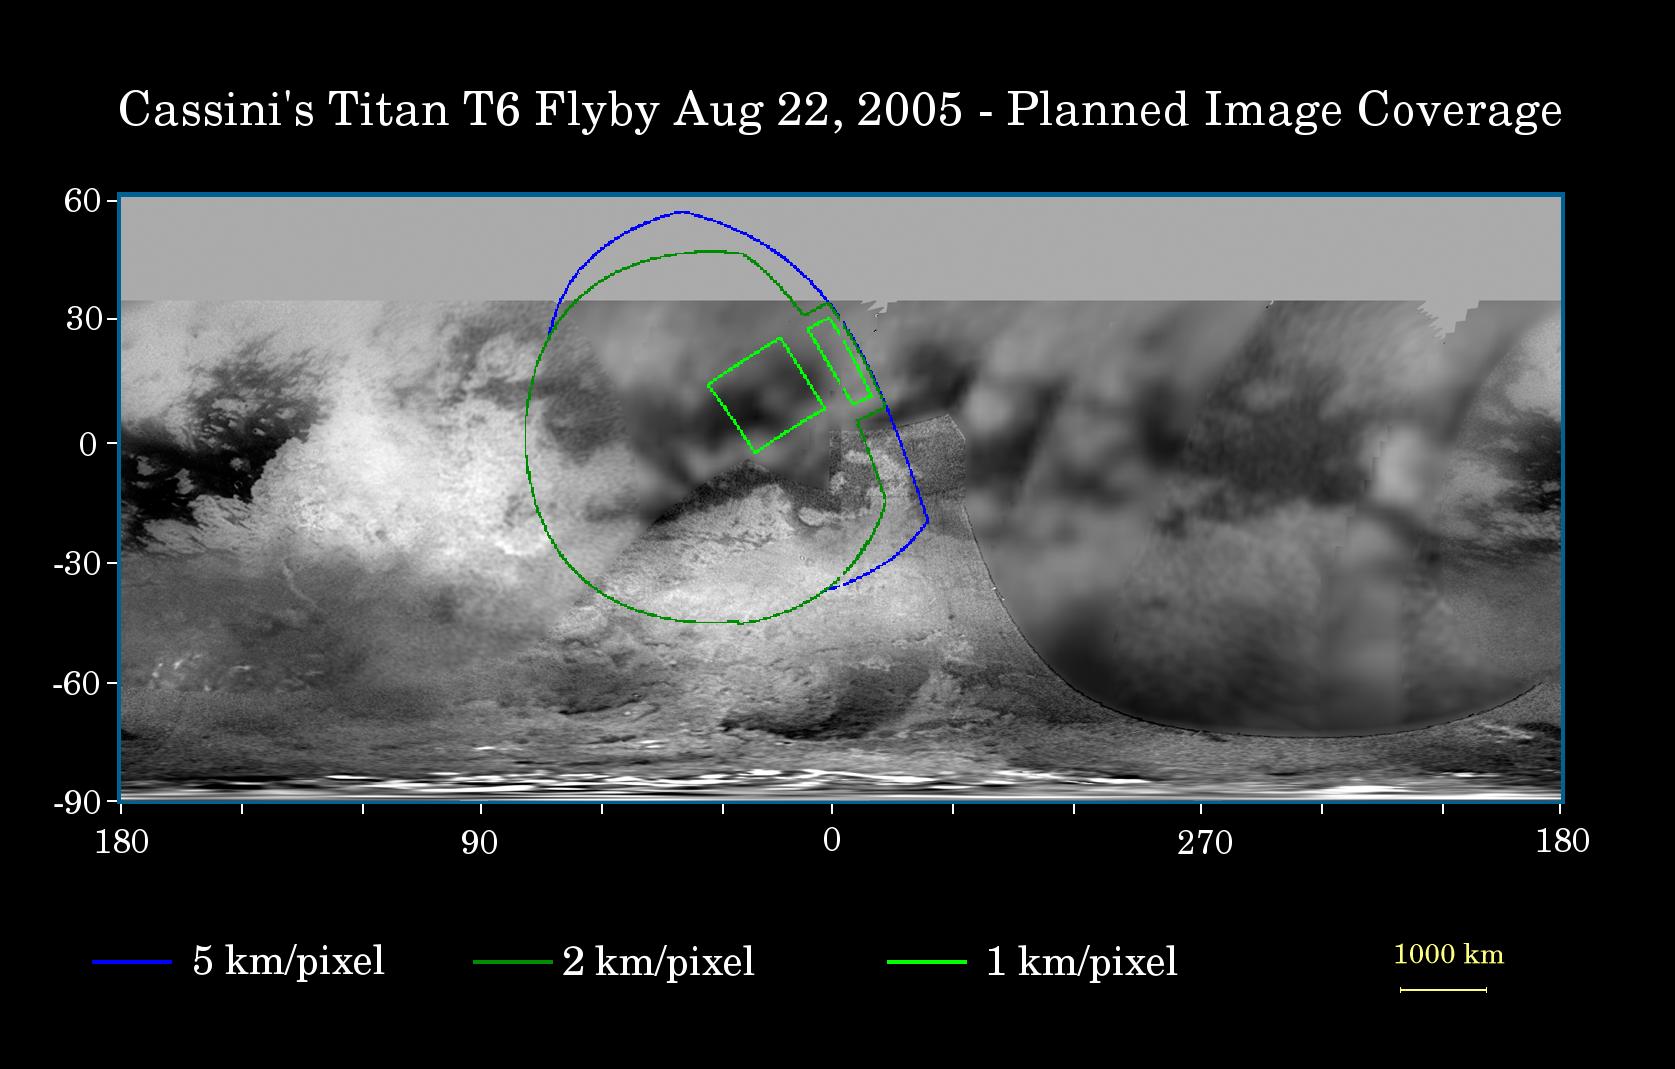 This map of Titan's surface illustrates the regions that will be imaged by Cassini during the spacecraft's close flyby of Titan on Aug. 22, 2005.